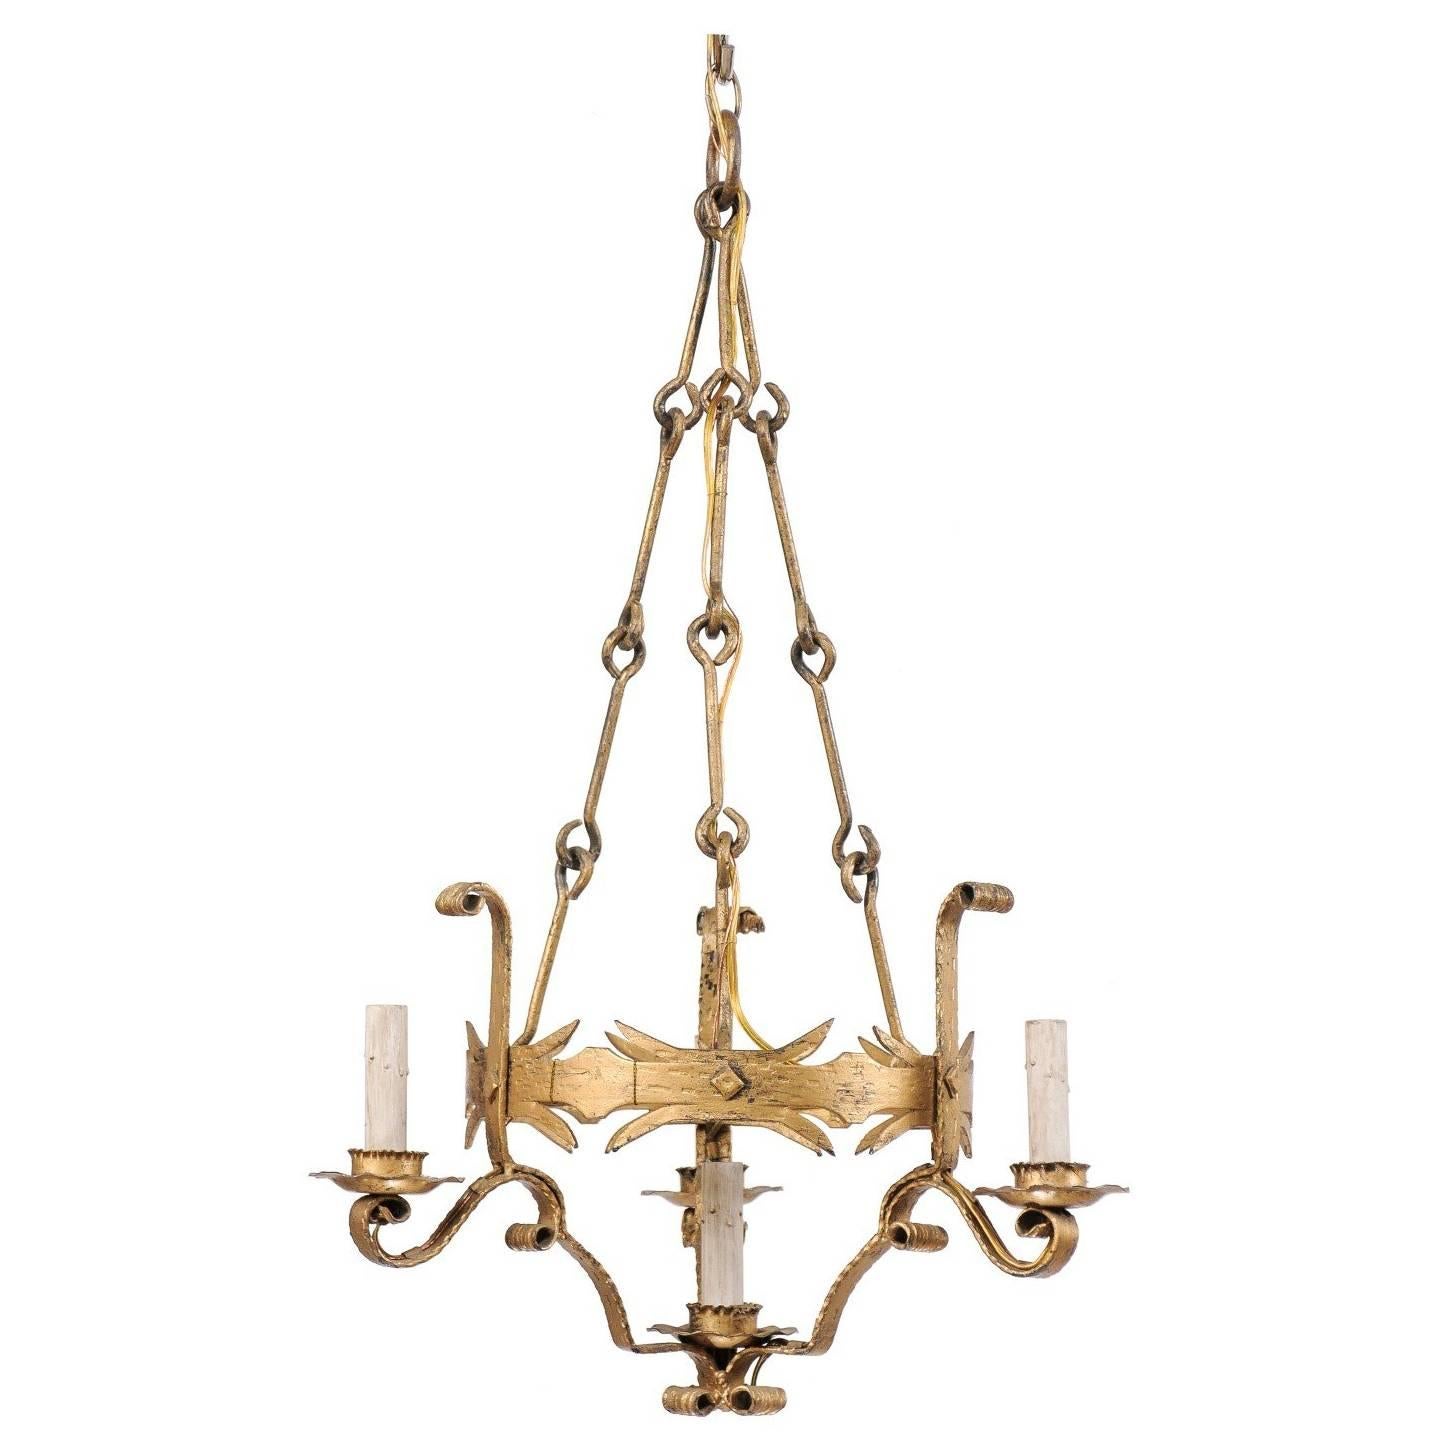 French Mid-20th Century Painted Iron Four-Light Tall Chandelier in Gold